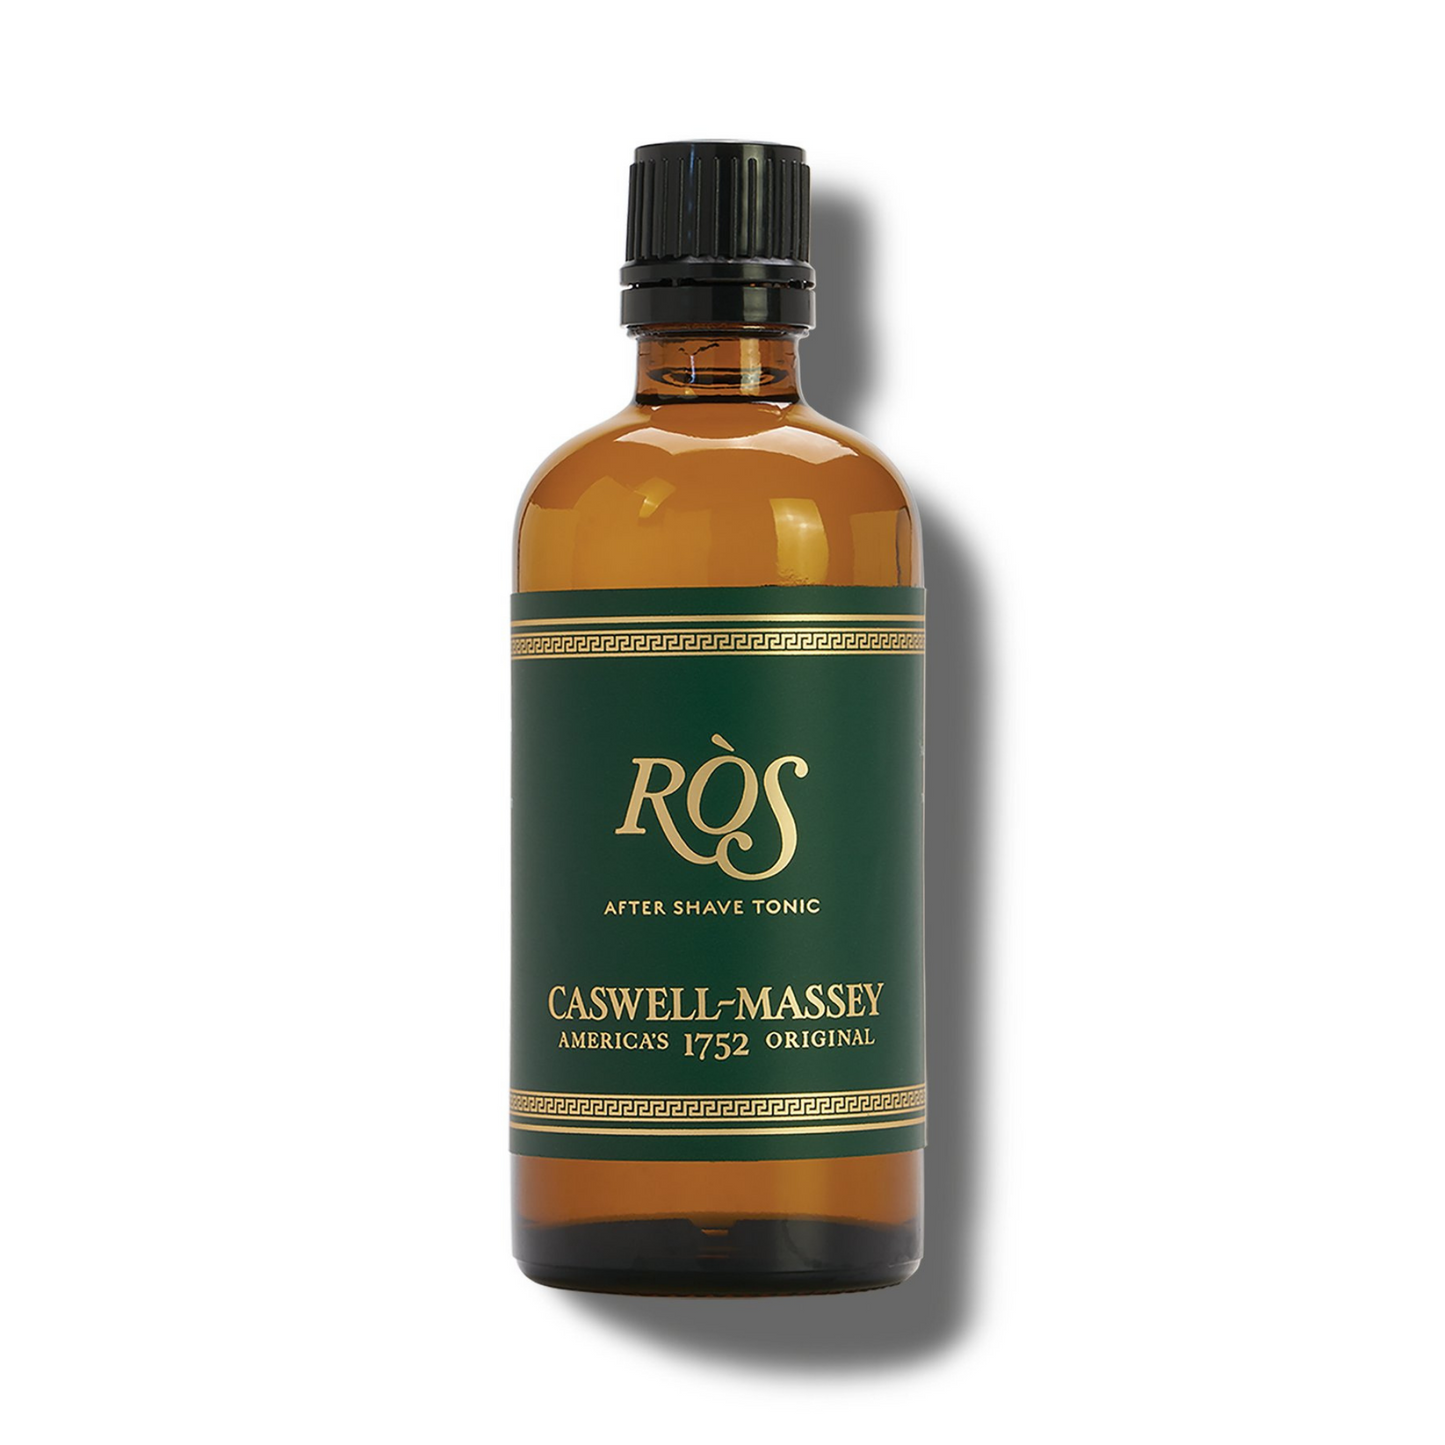 Primary Image of ROS After Shave Tonic